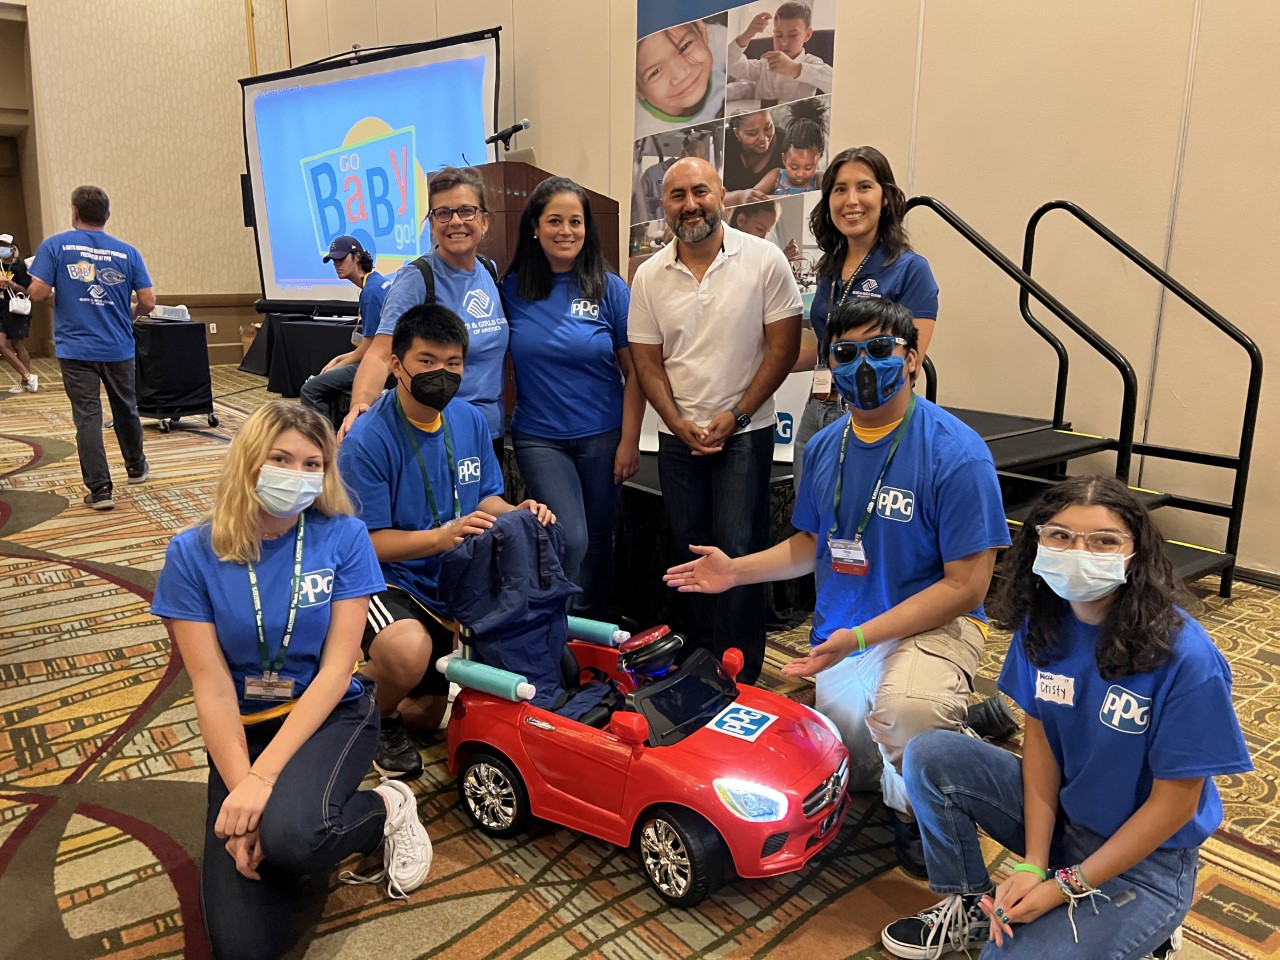 BGCA Senior Executive with BGCA teen leaders who completed the reconfiguration of an electric car pose with X-Bots Robotics Executive Director and BGC of Whittier staff.